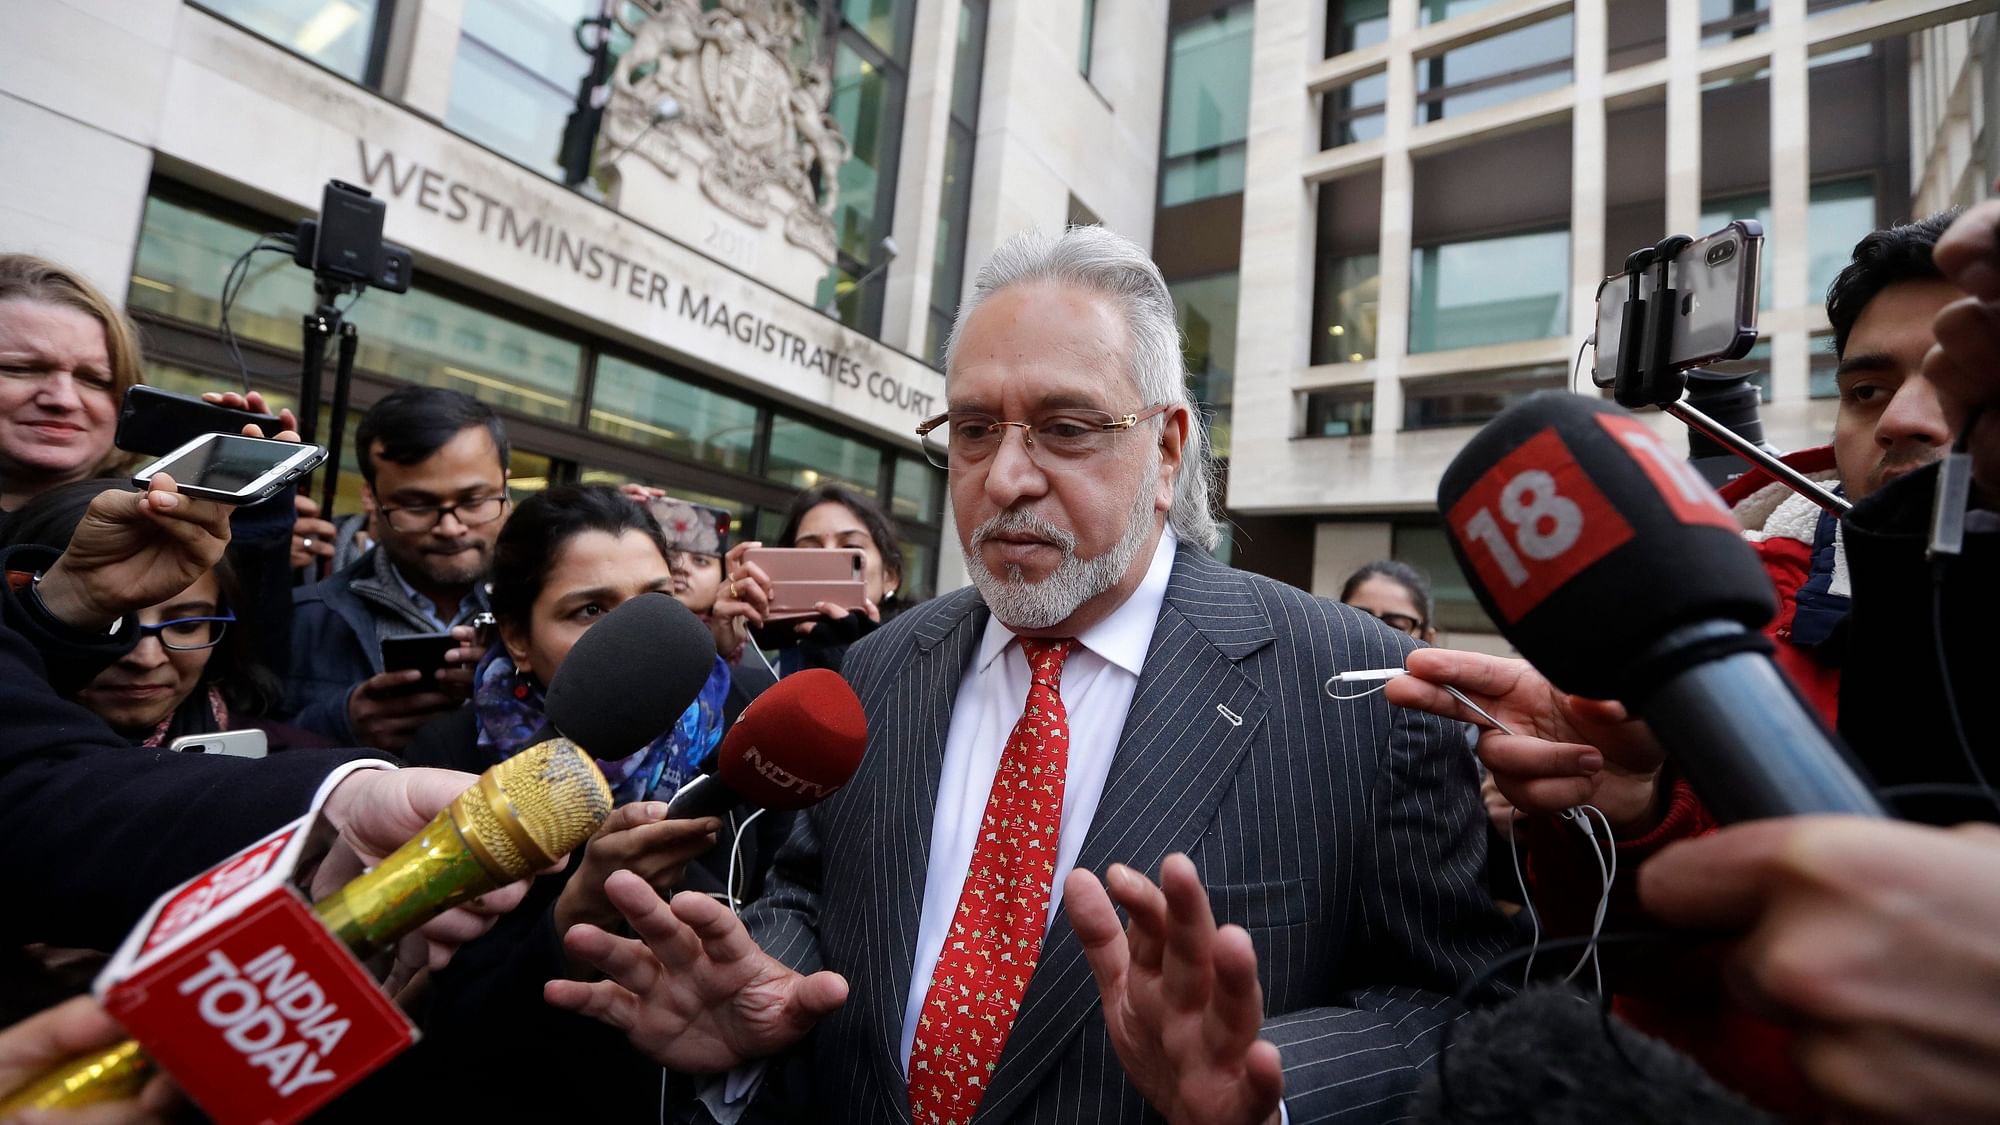 Indian businessman Vijay Mallya is surrounded by the media as he leaves Westminster Magistrates Court in London in 2018.